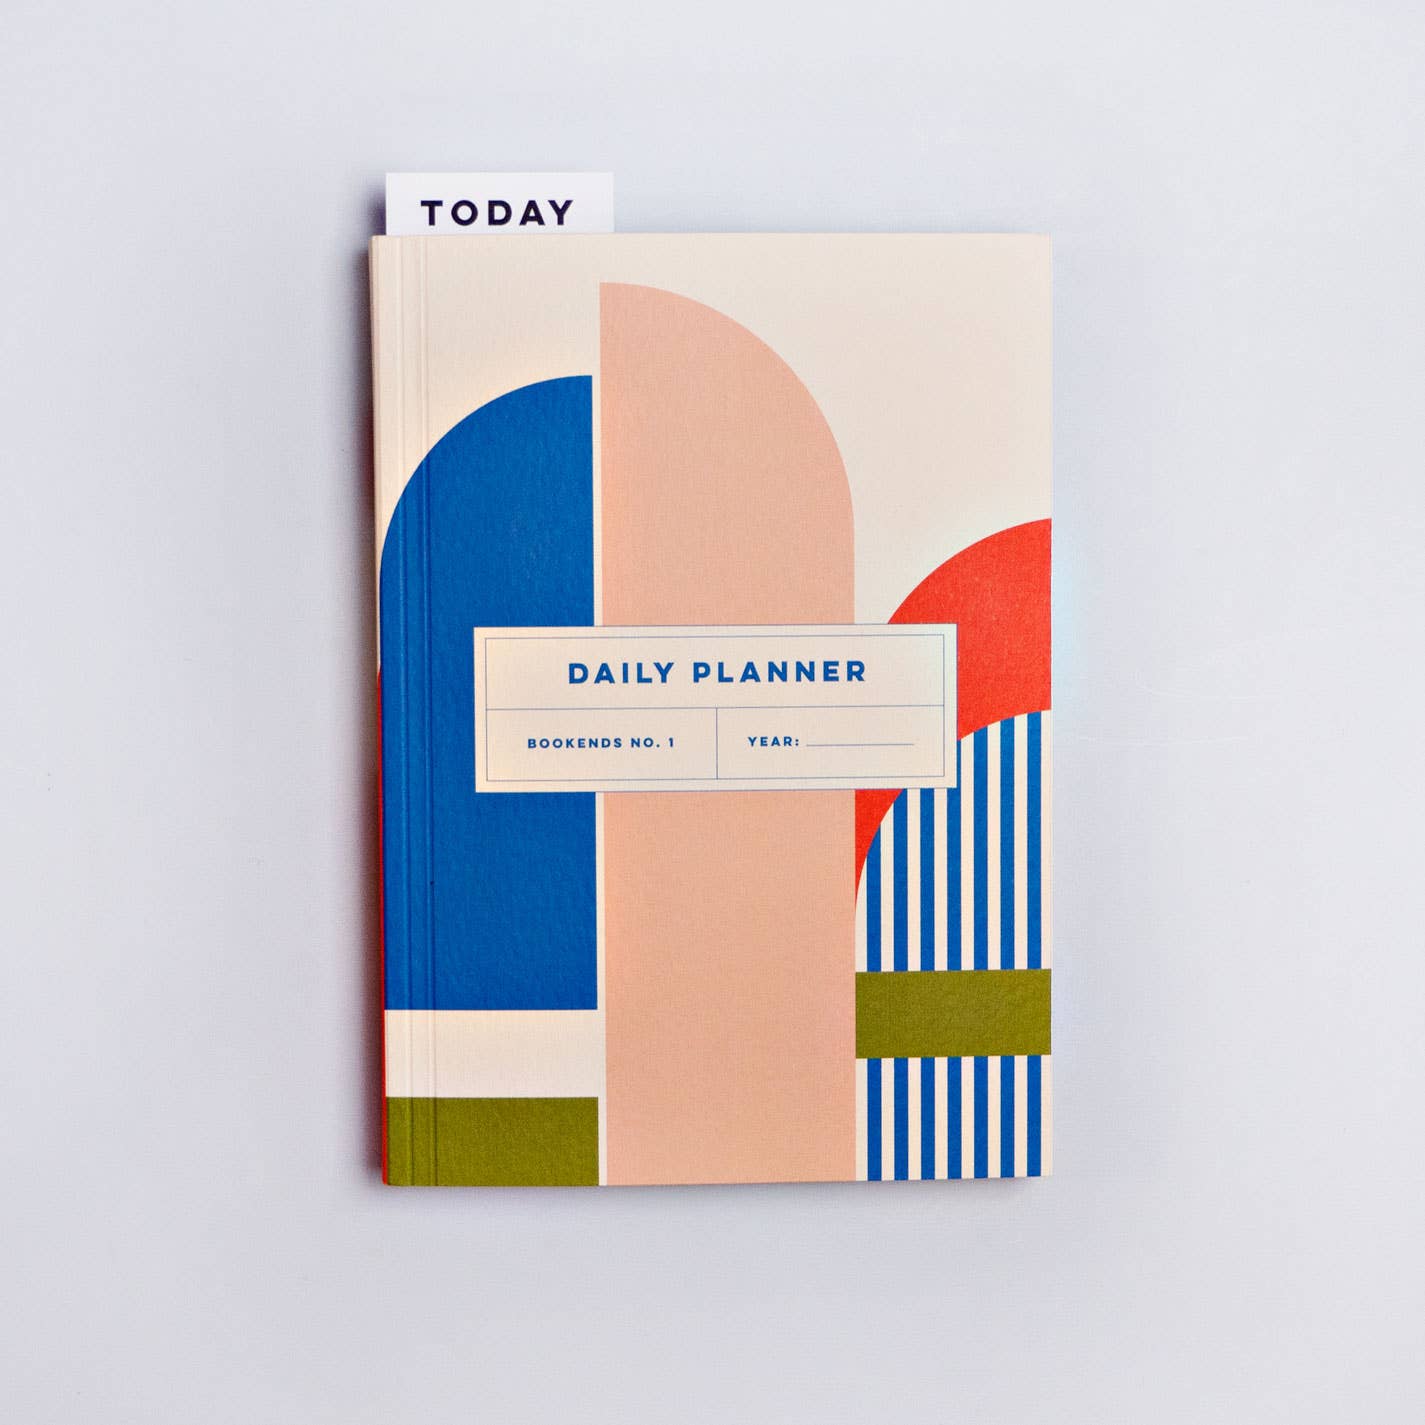 Bookends No. 1 Daily Planner Book